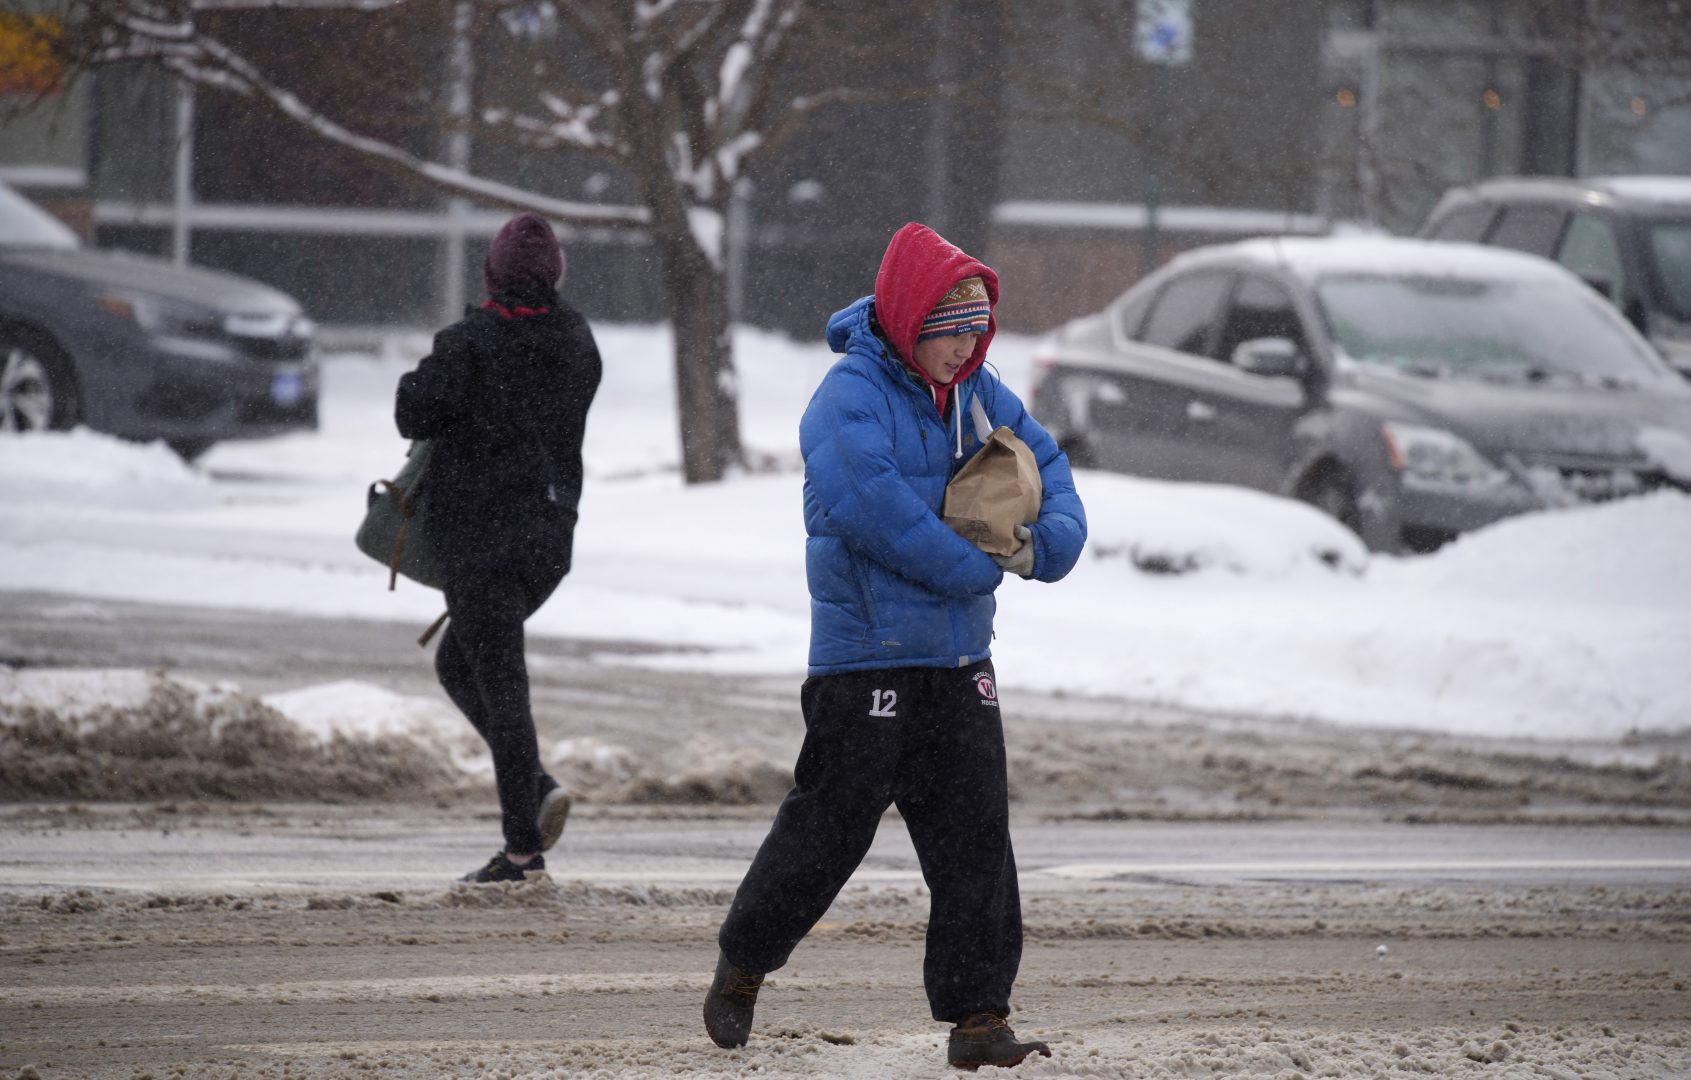 Bundled up against the cold, a pedestrian cradles a package while crossing in the intersection of Logan Street and Alameda as a winter storm sweeps over the intermountain West Wednesday Feb. 2, 2022, in Denver. Forecasters predict that the storm will move out Wednesday on to the eastern plains and on to the Midwest, which is bracing for heavy snowfall and icy conditions in the days ahead. (AP Photo/David Zalubowski)